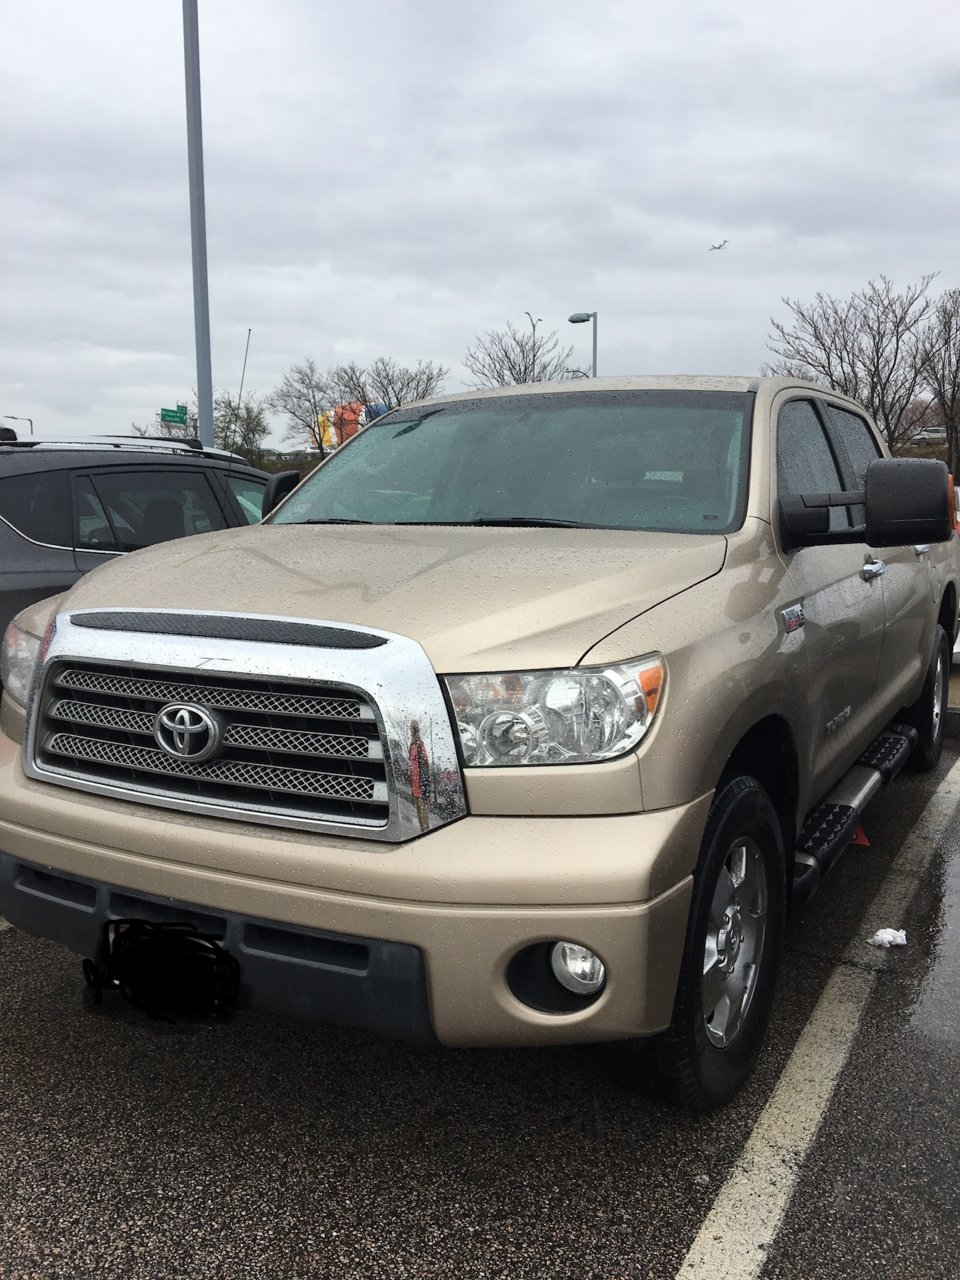 Leather seat issues | Toyota Tundra Forum